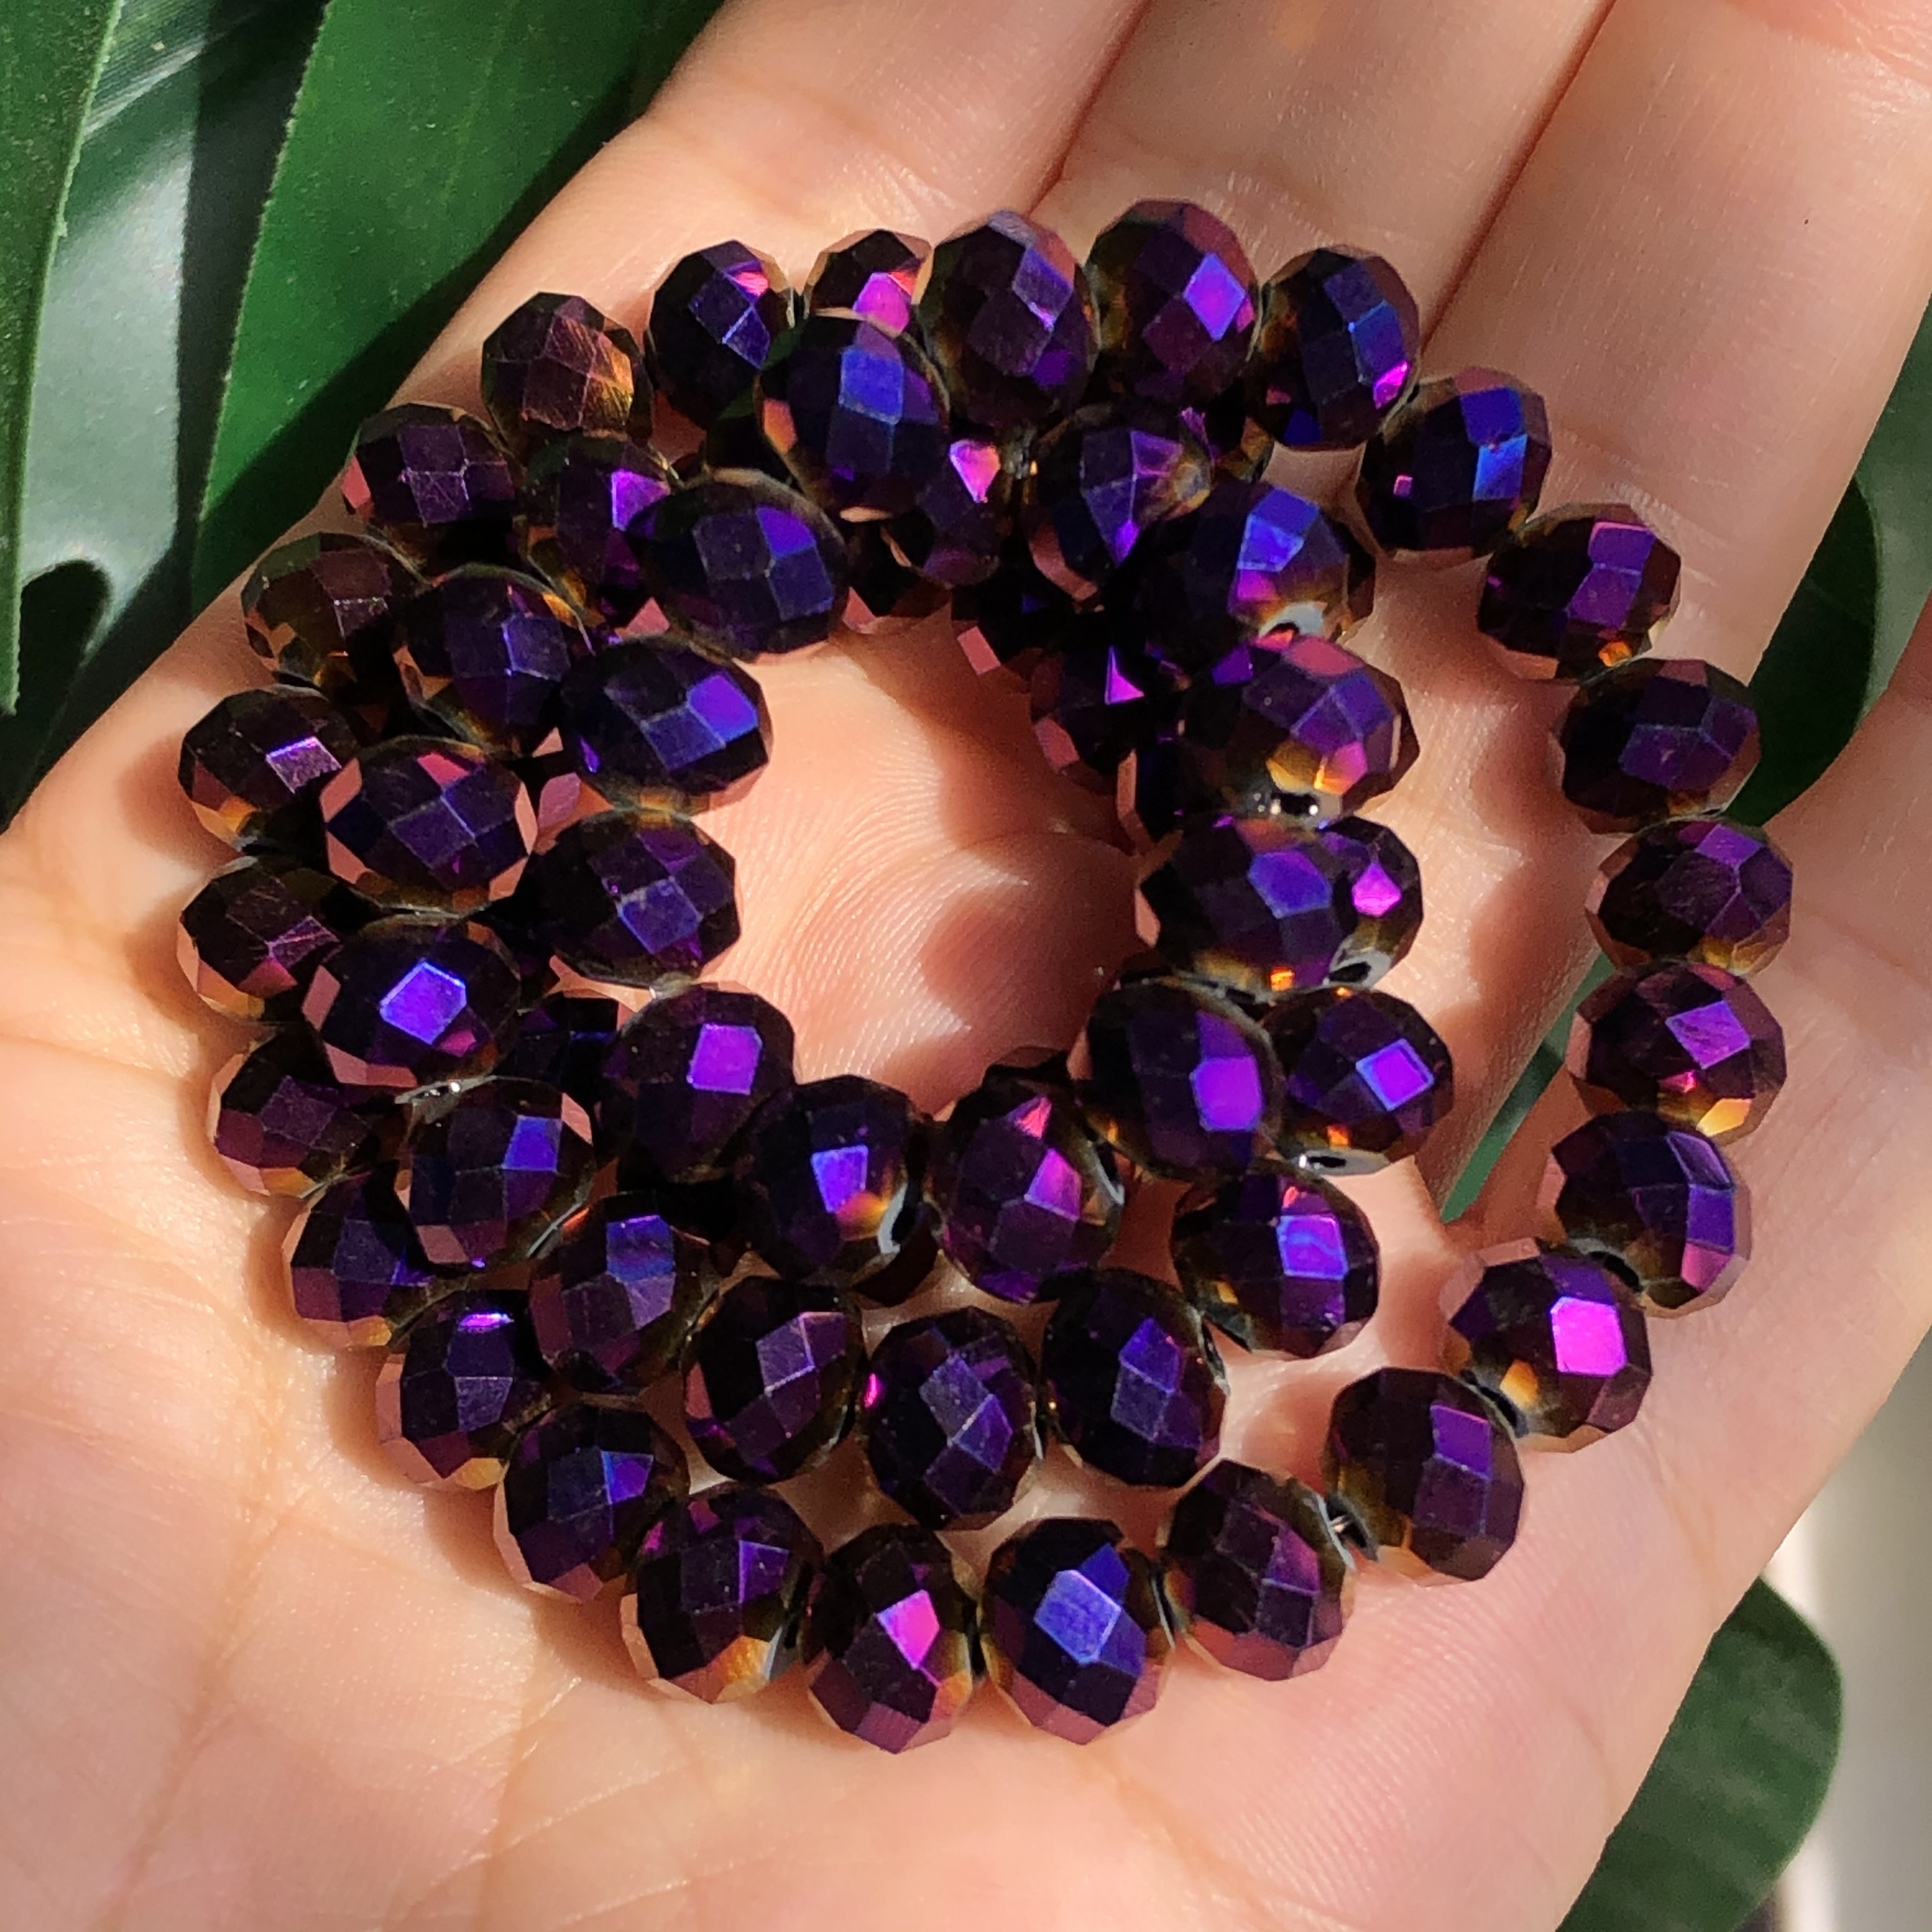 jusbeaut 265Pcs Purple Crystal Beads, Briollete Faceted Crystal Glass Beads  for Jewelry Making, 8mm DIY Bulk Glass Beads for Crafts, Faceted Crystal